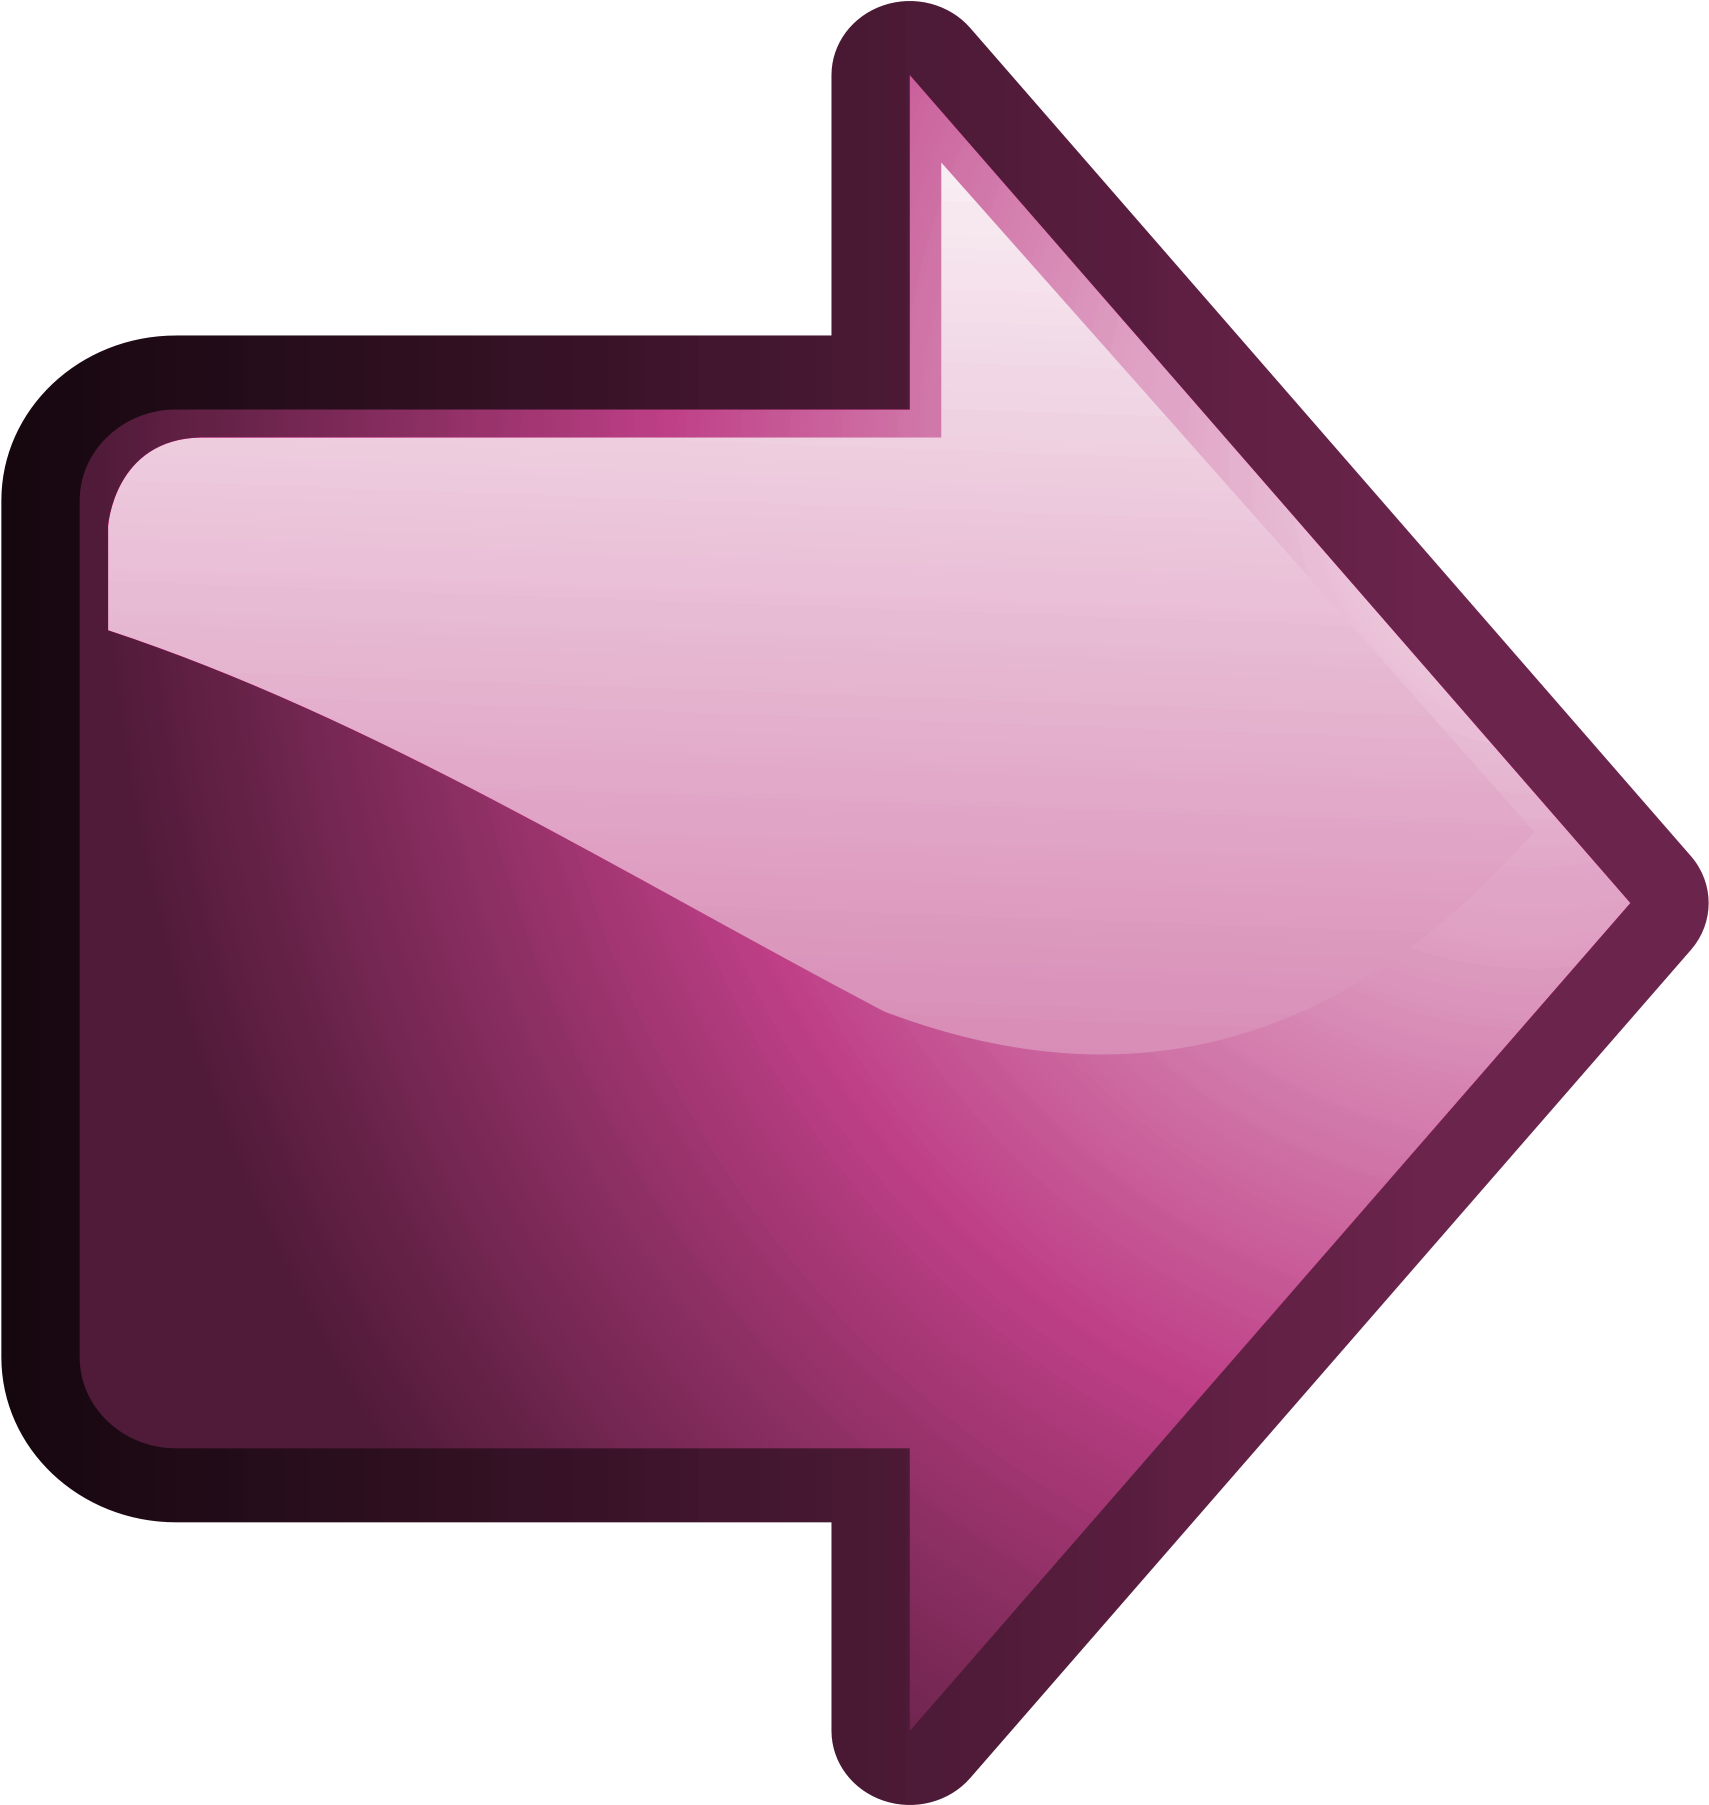 A Pink Arrow Pointing To The Left